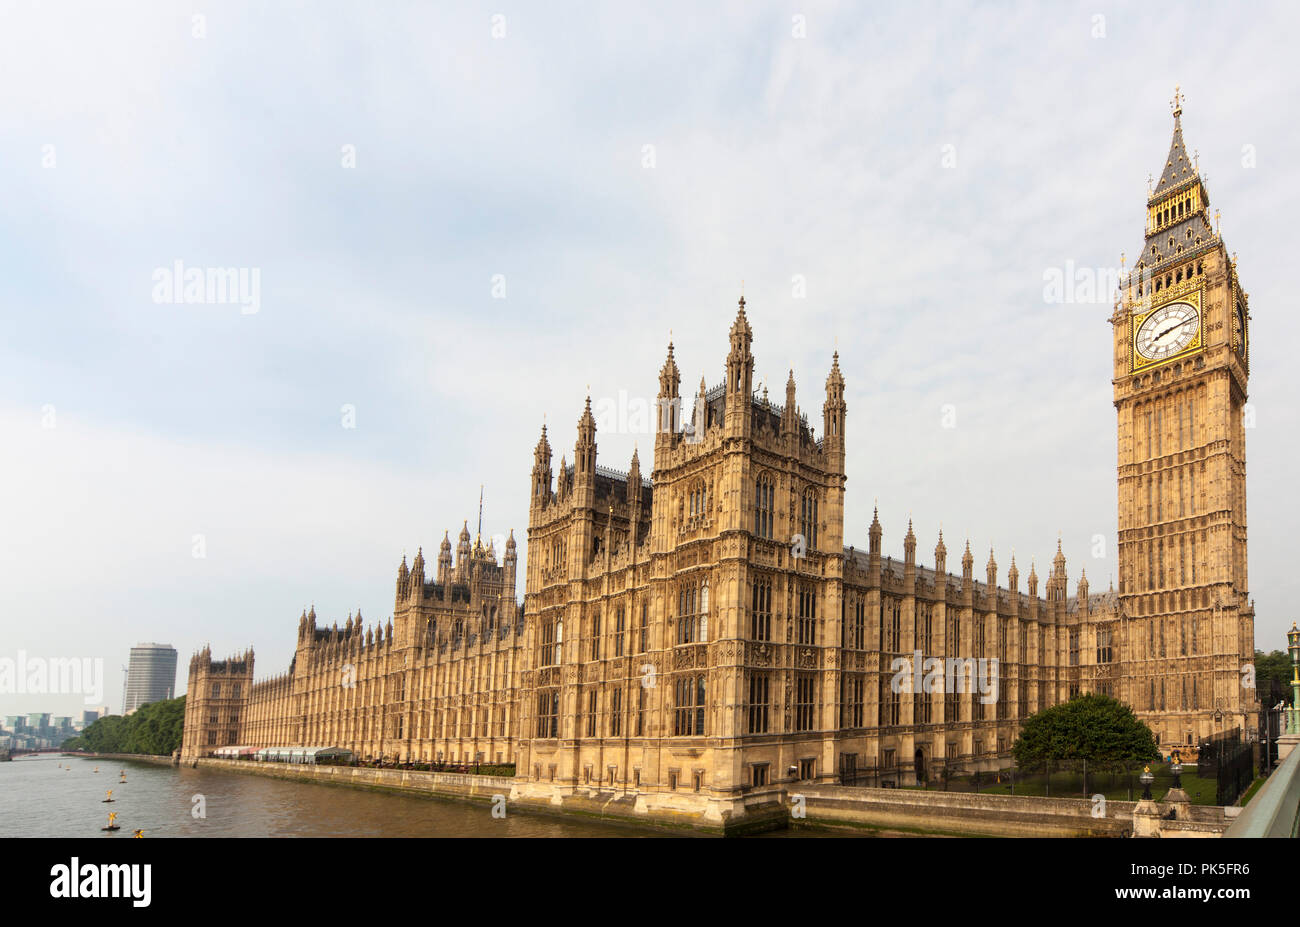 The Houses of Parliament, London. Shot in 2012 there is no scaffolding seen on the building. Stock Photo